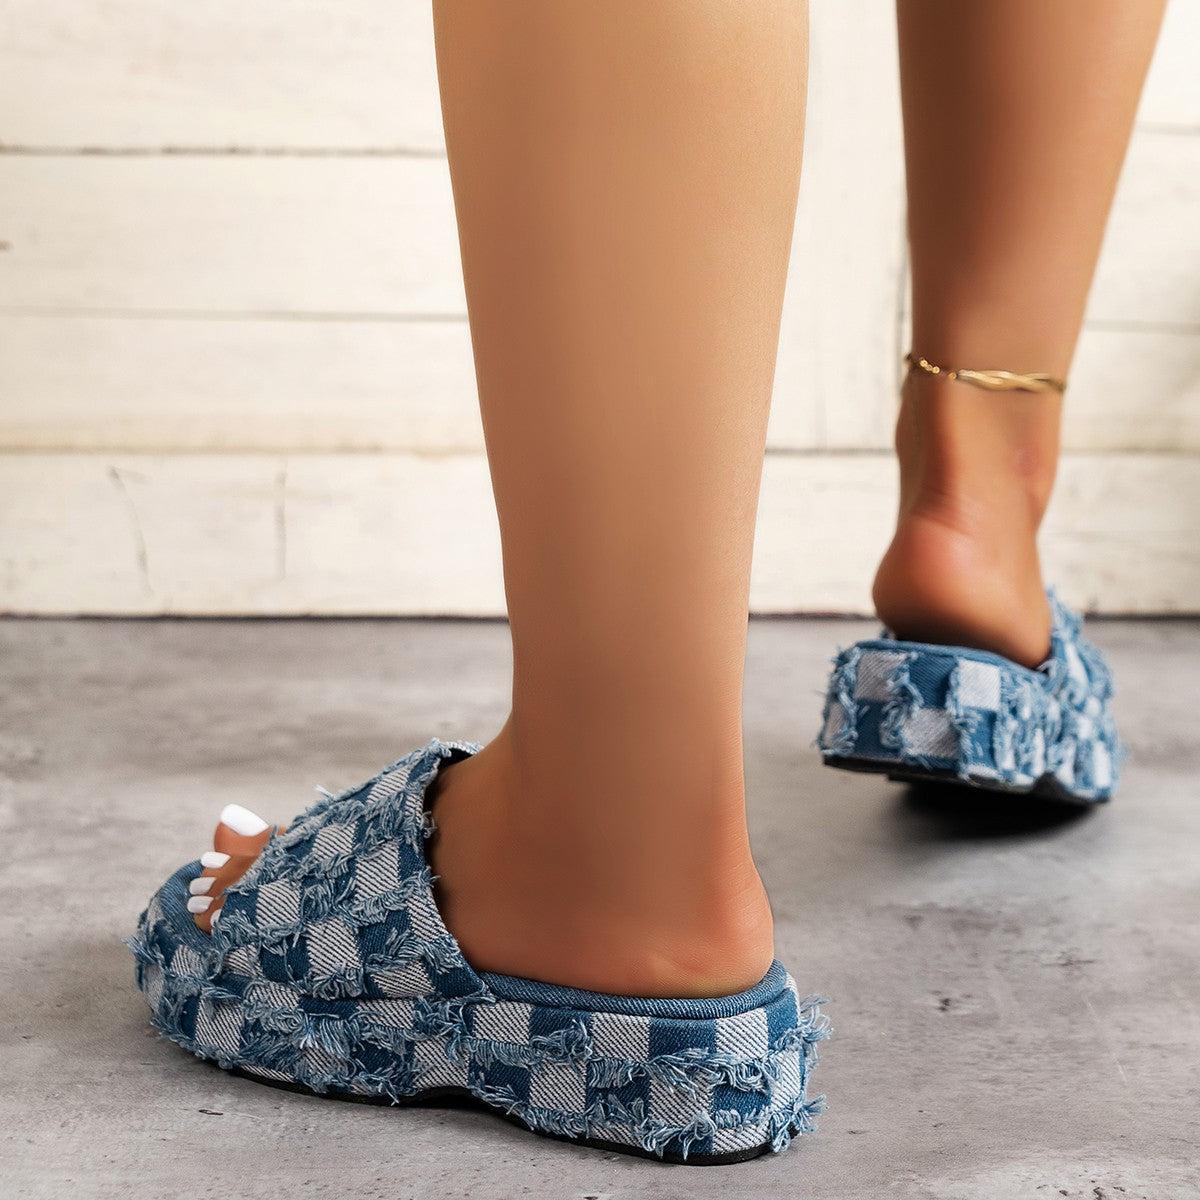 a close up of a person's feet wearing blue slippers